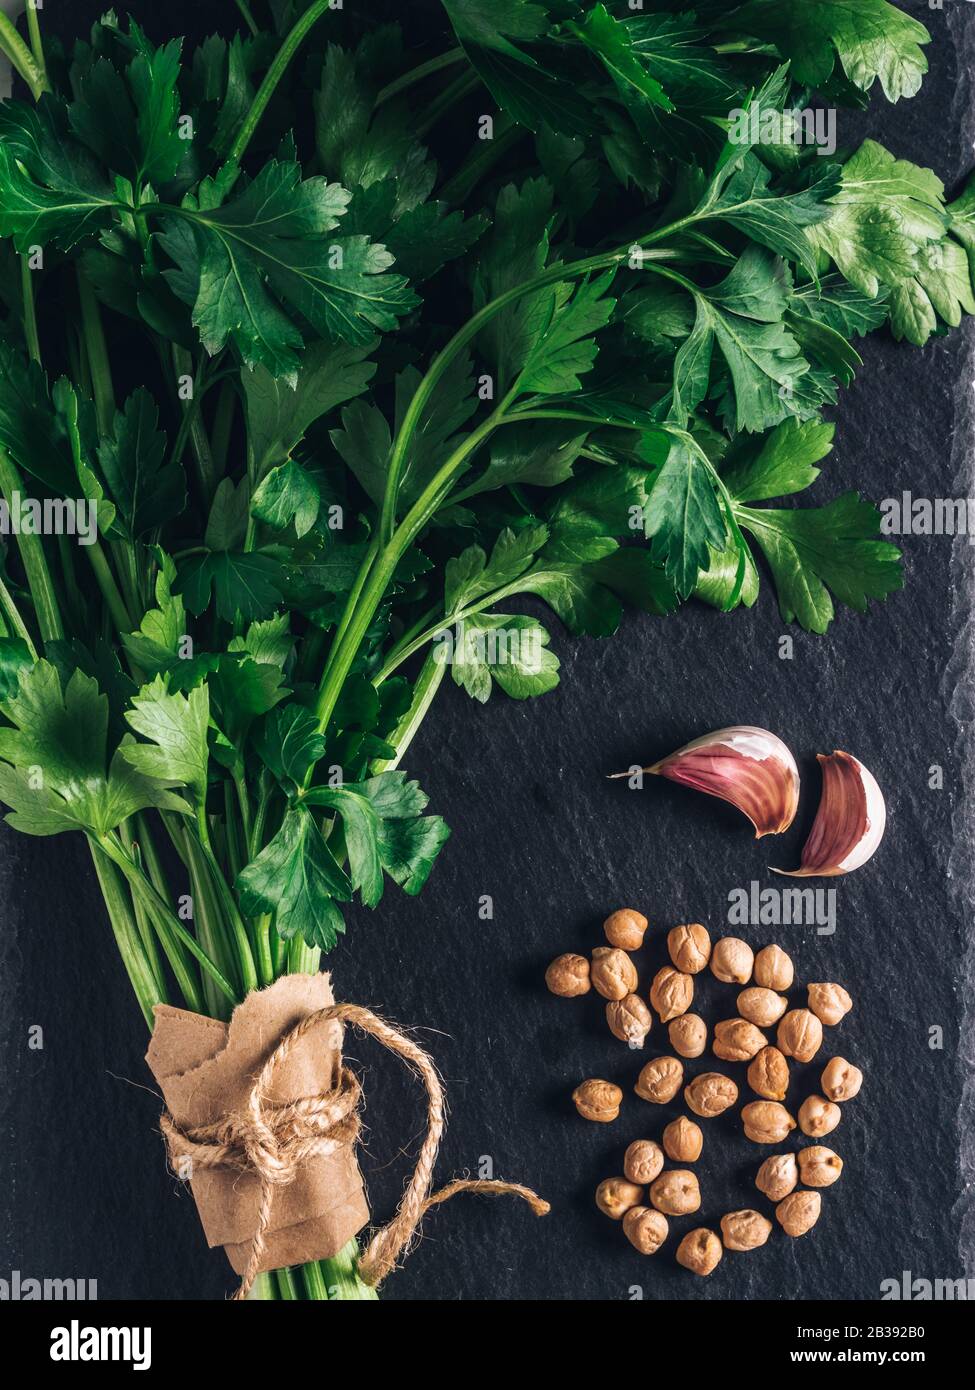 freshness parsley, garlic and chickpeas  . Bunch of parsley, green organic herb. Vegetable ingredient for healthy tasty food. Stock Photo